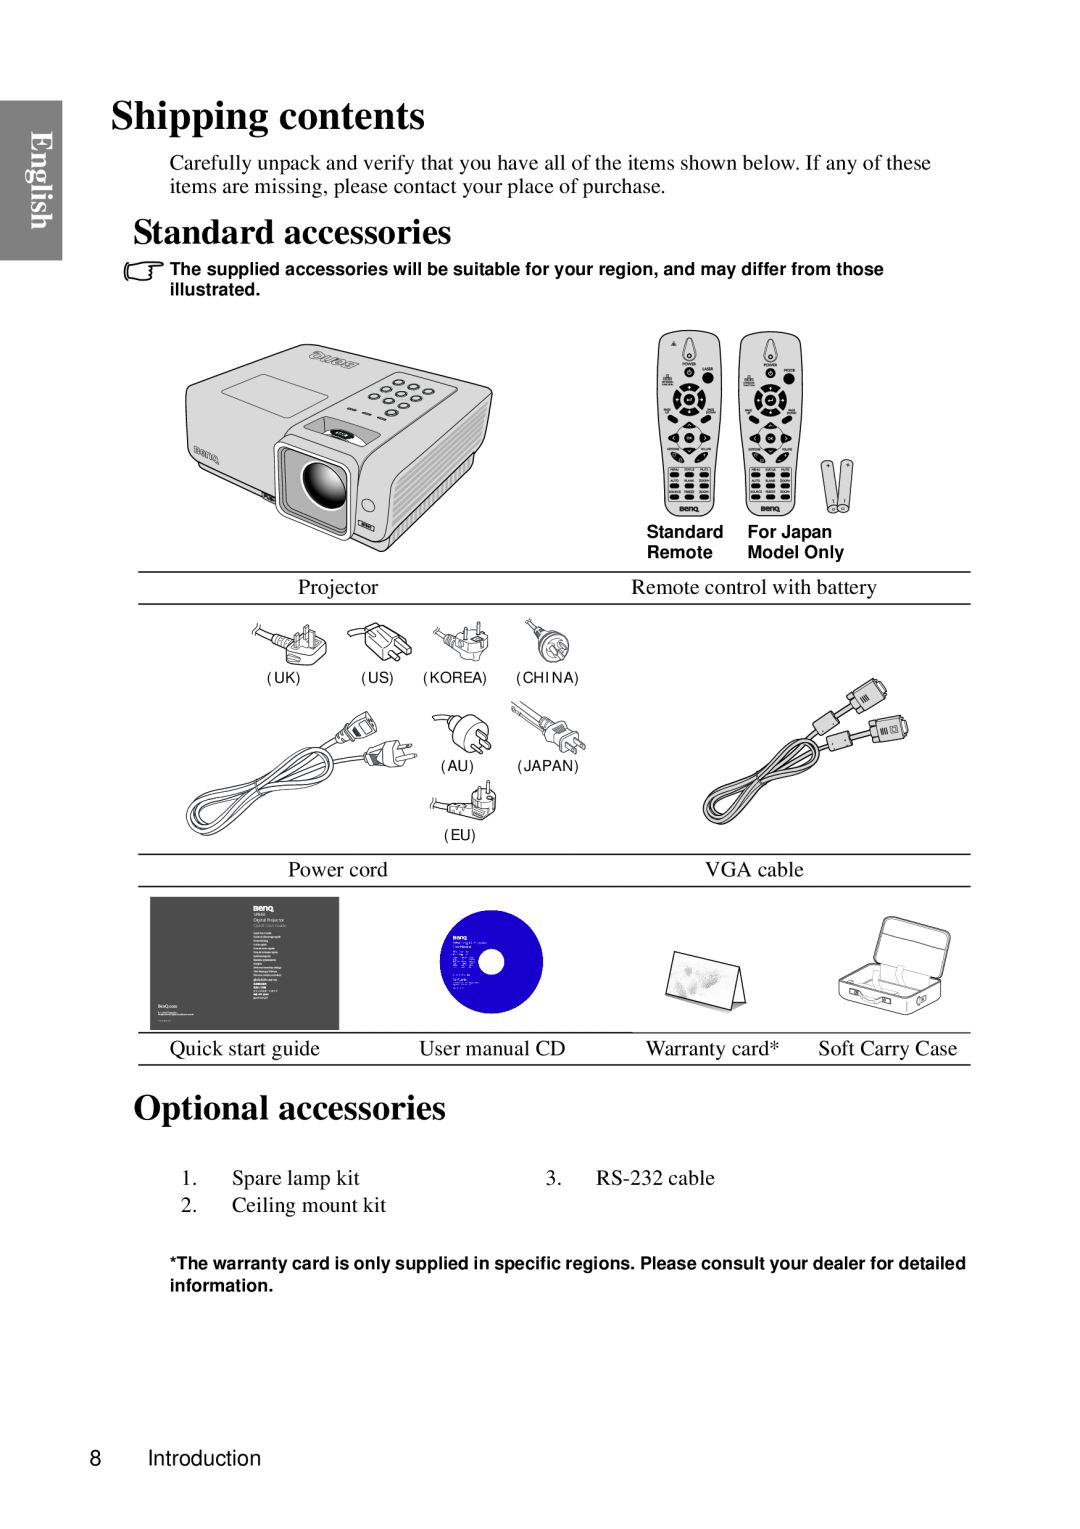 BenQ SP840 user manual Shipping contents, Standard accessories, Optional accessories, English 